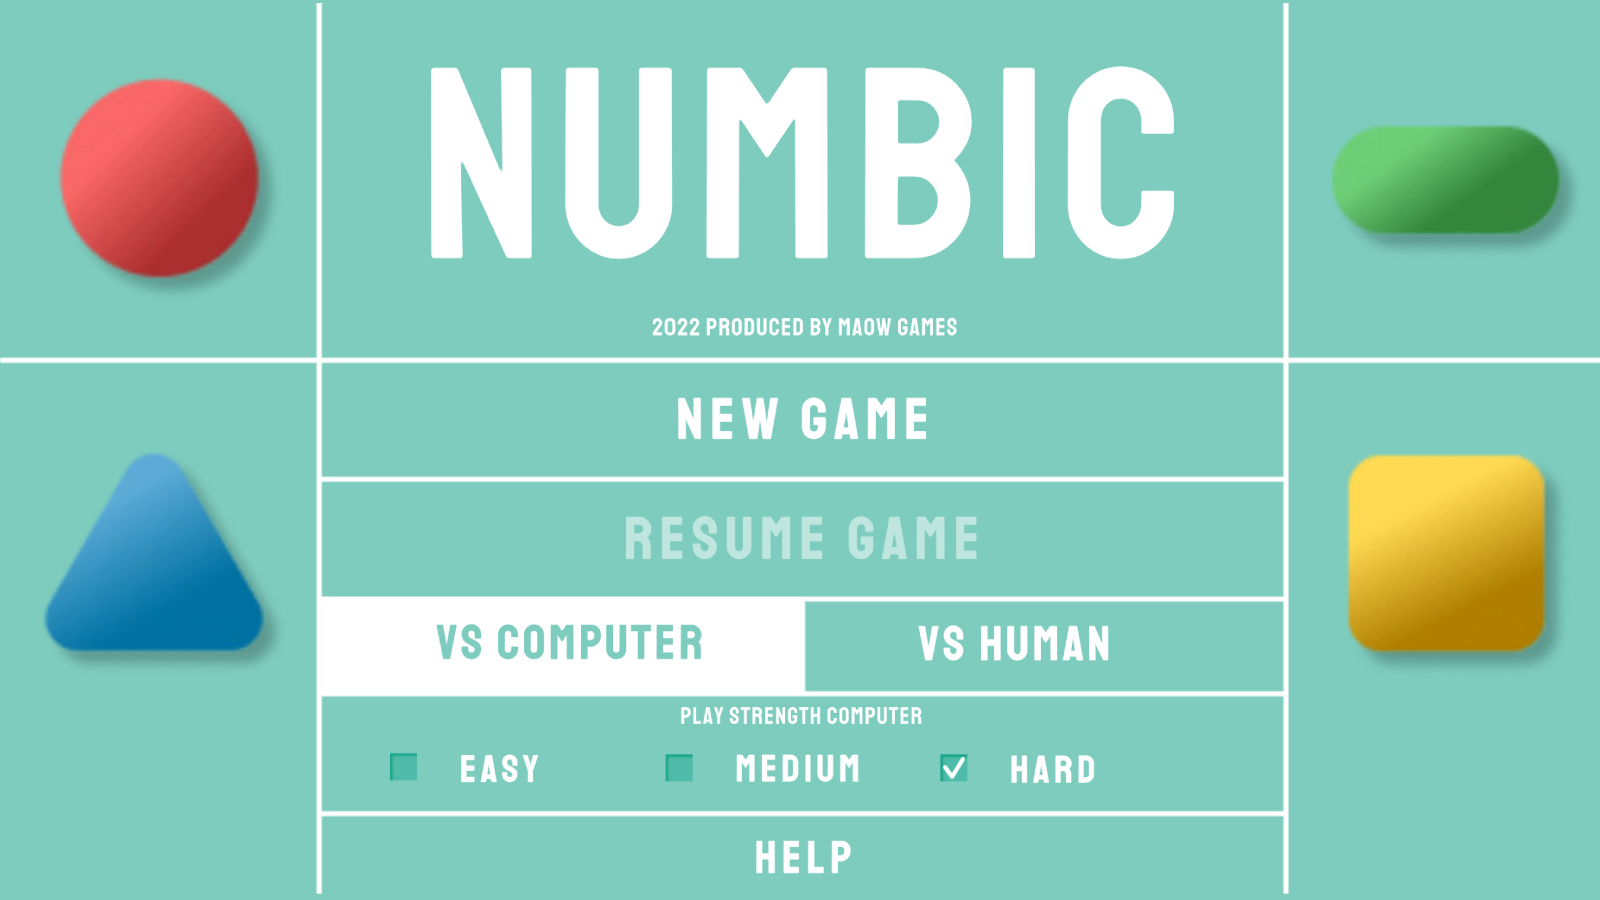 
NUMBIC: The new game from MaOwGames!